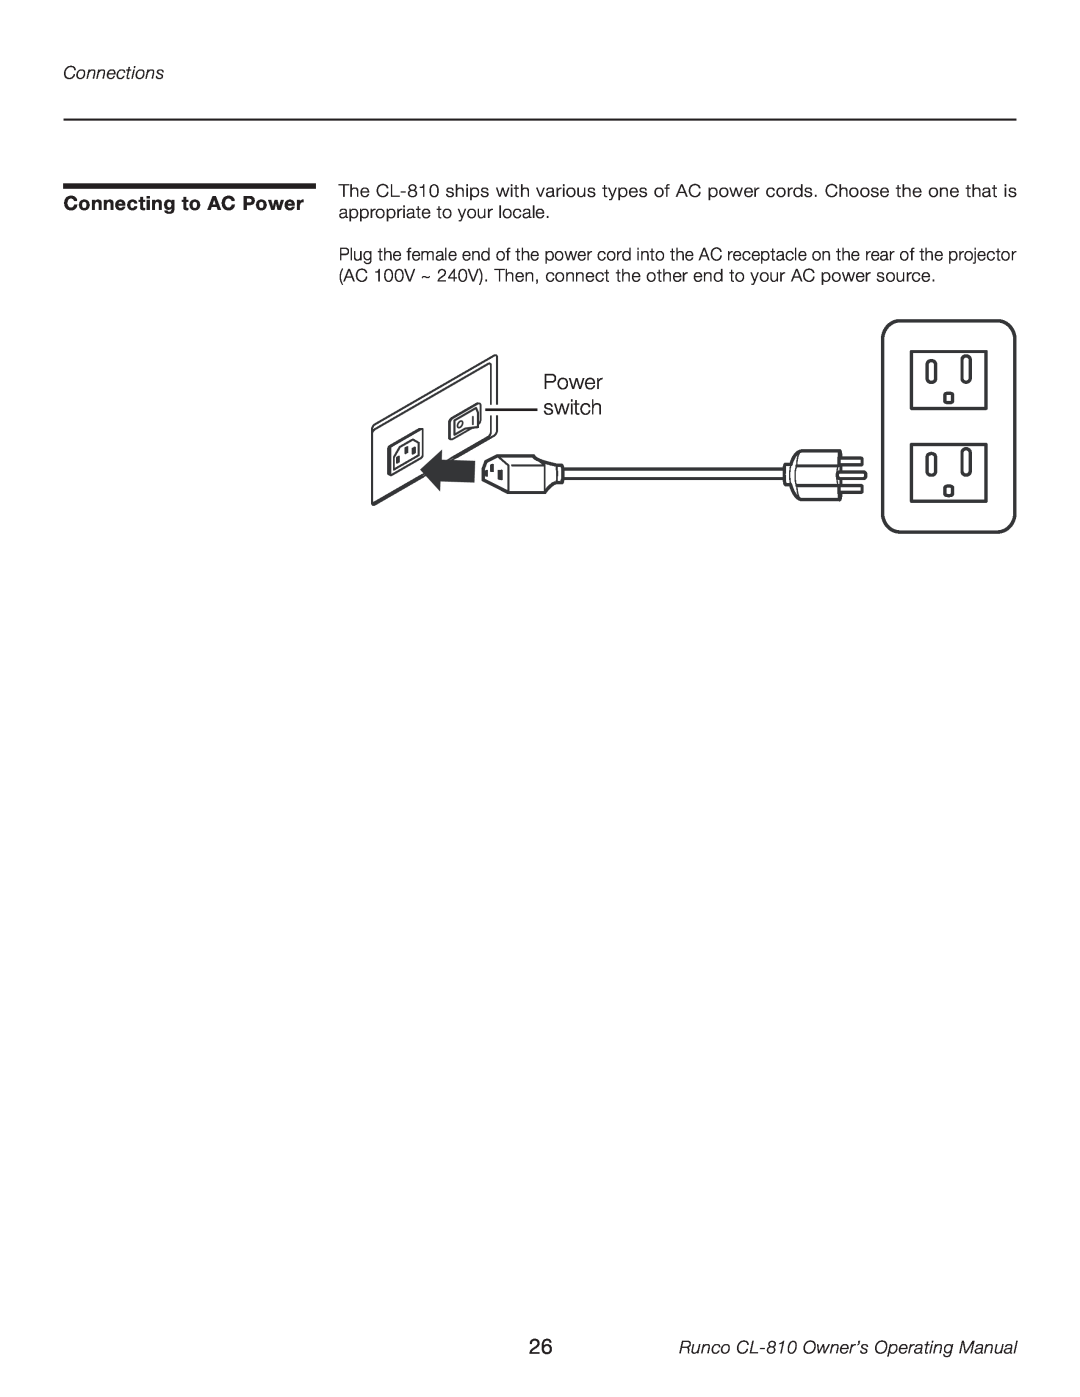 Runco manual Connecting to AC Power, Power switch, Connections, Runco CL-810 Owner’s Operating Manual 